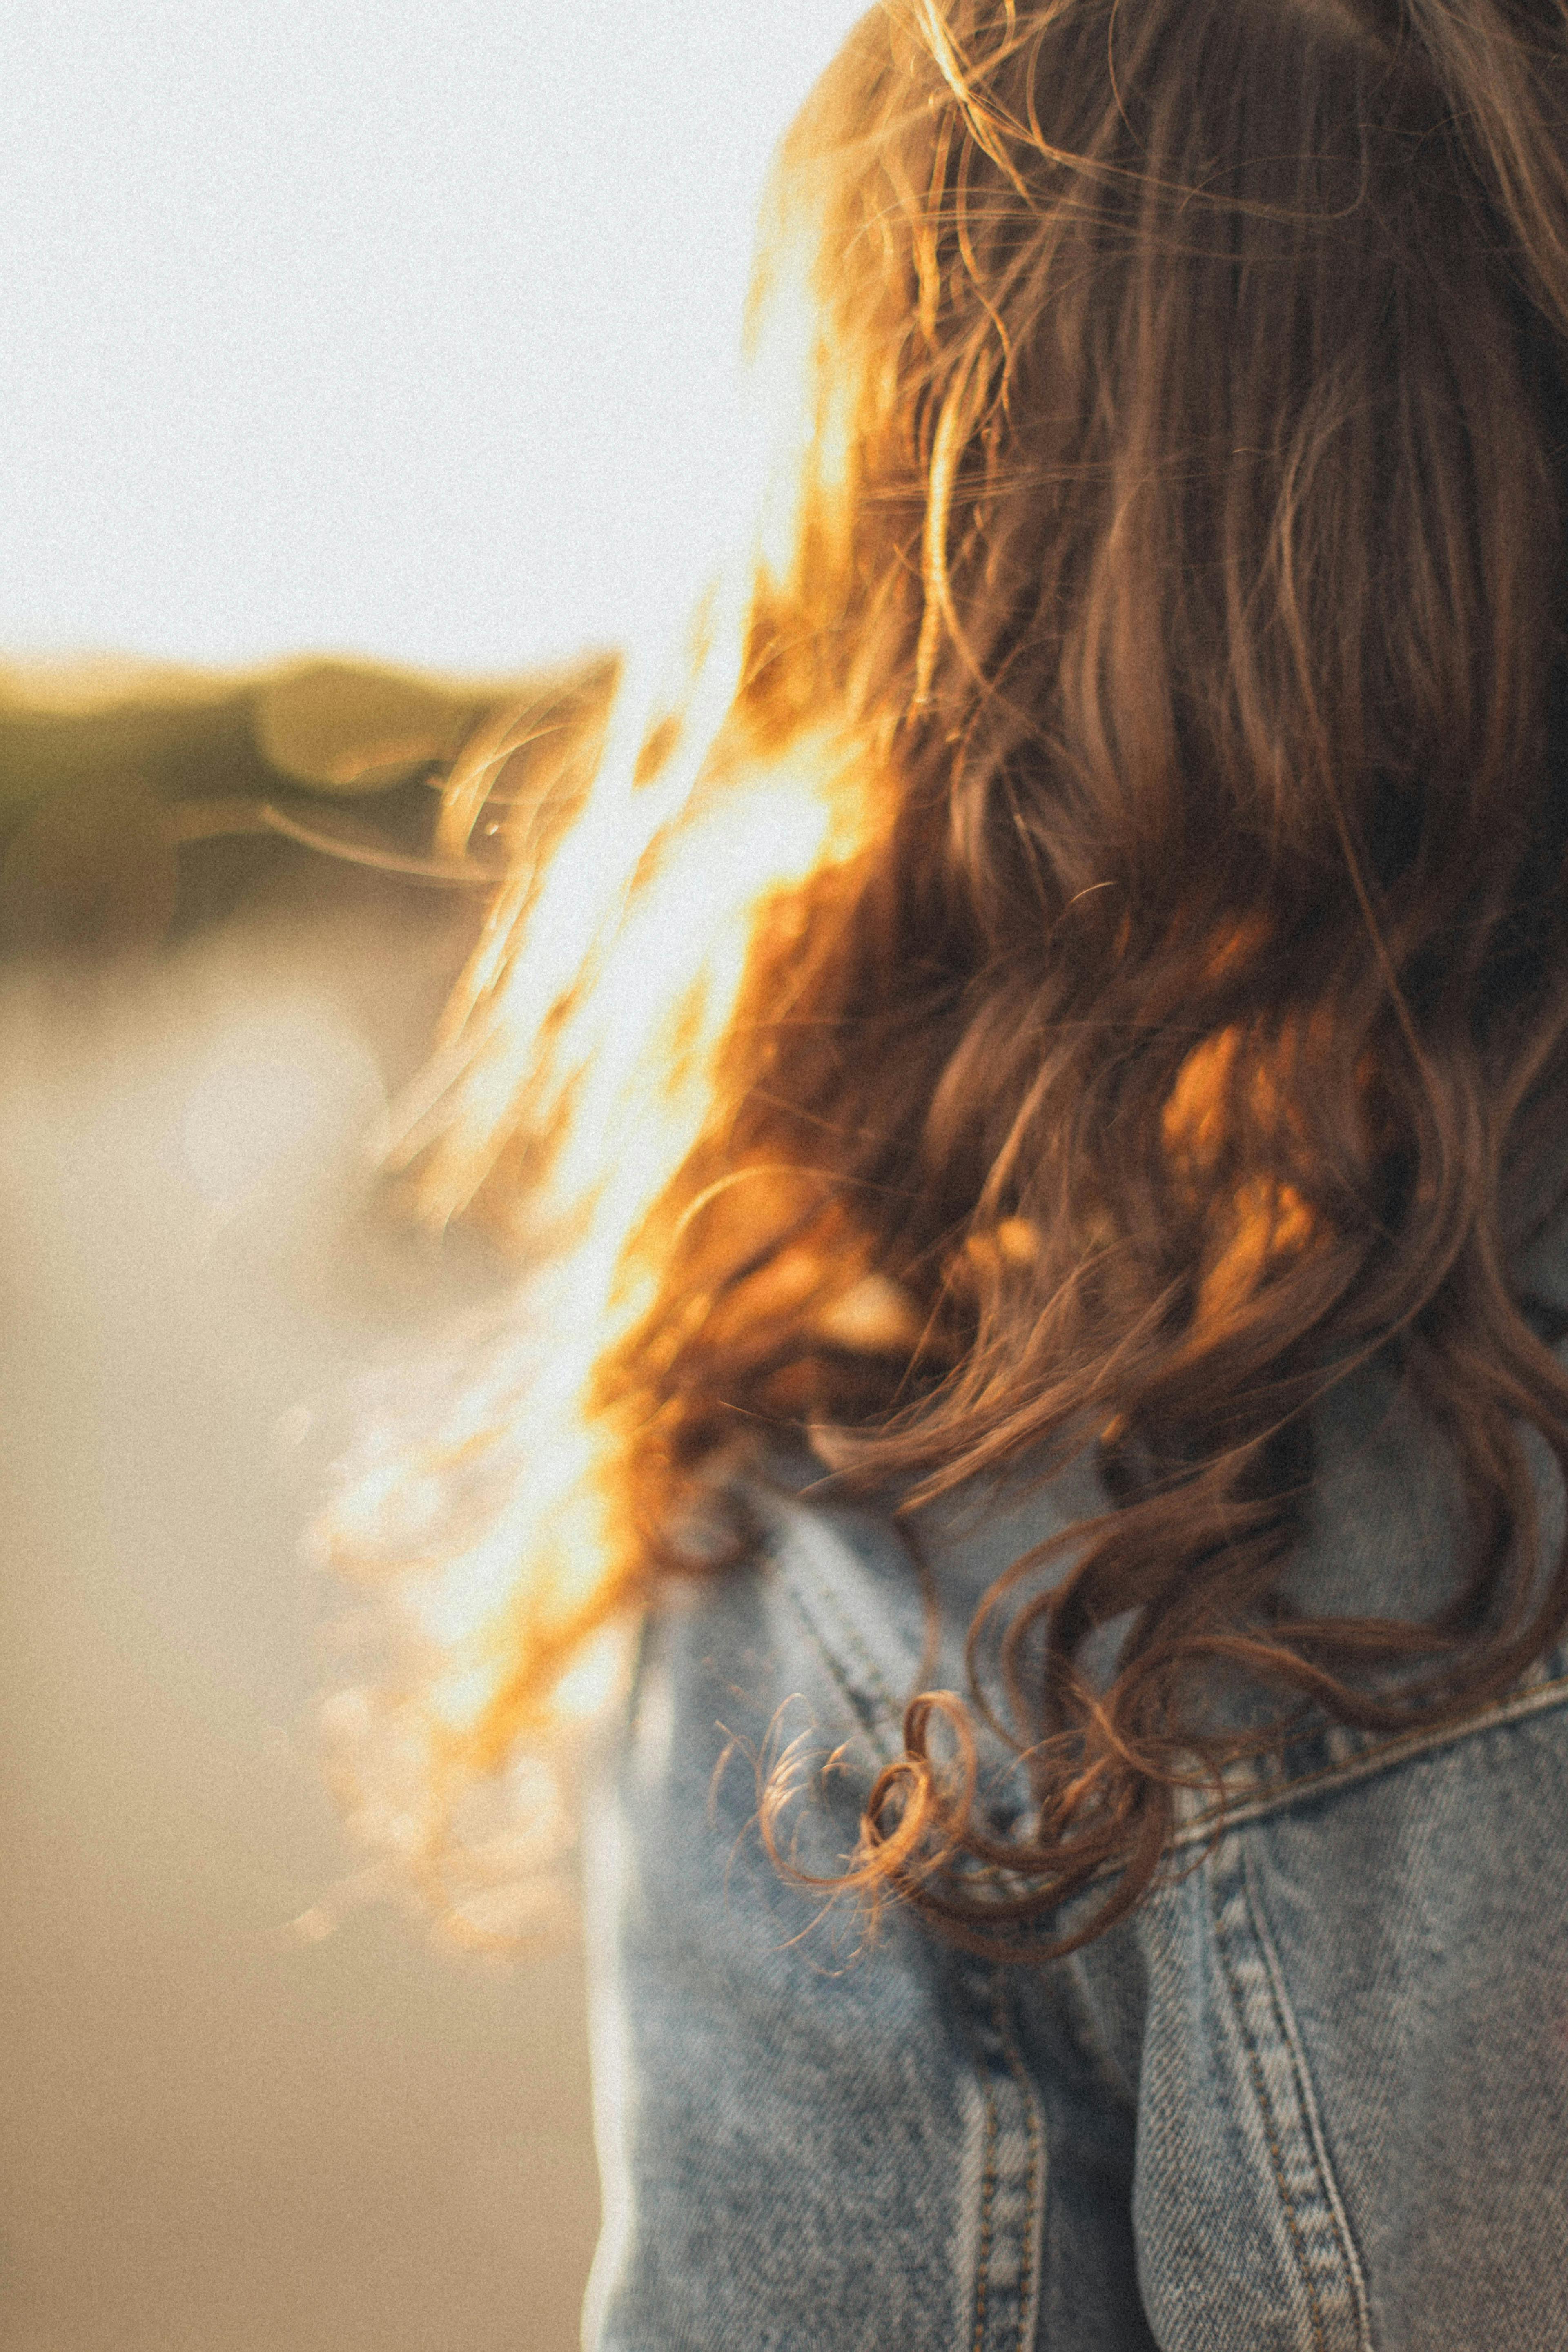 500+ Long Hair Pictures | Download Free Images on Unsplash